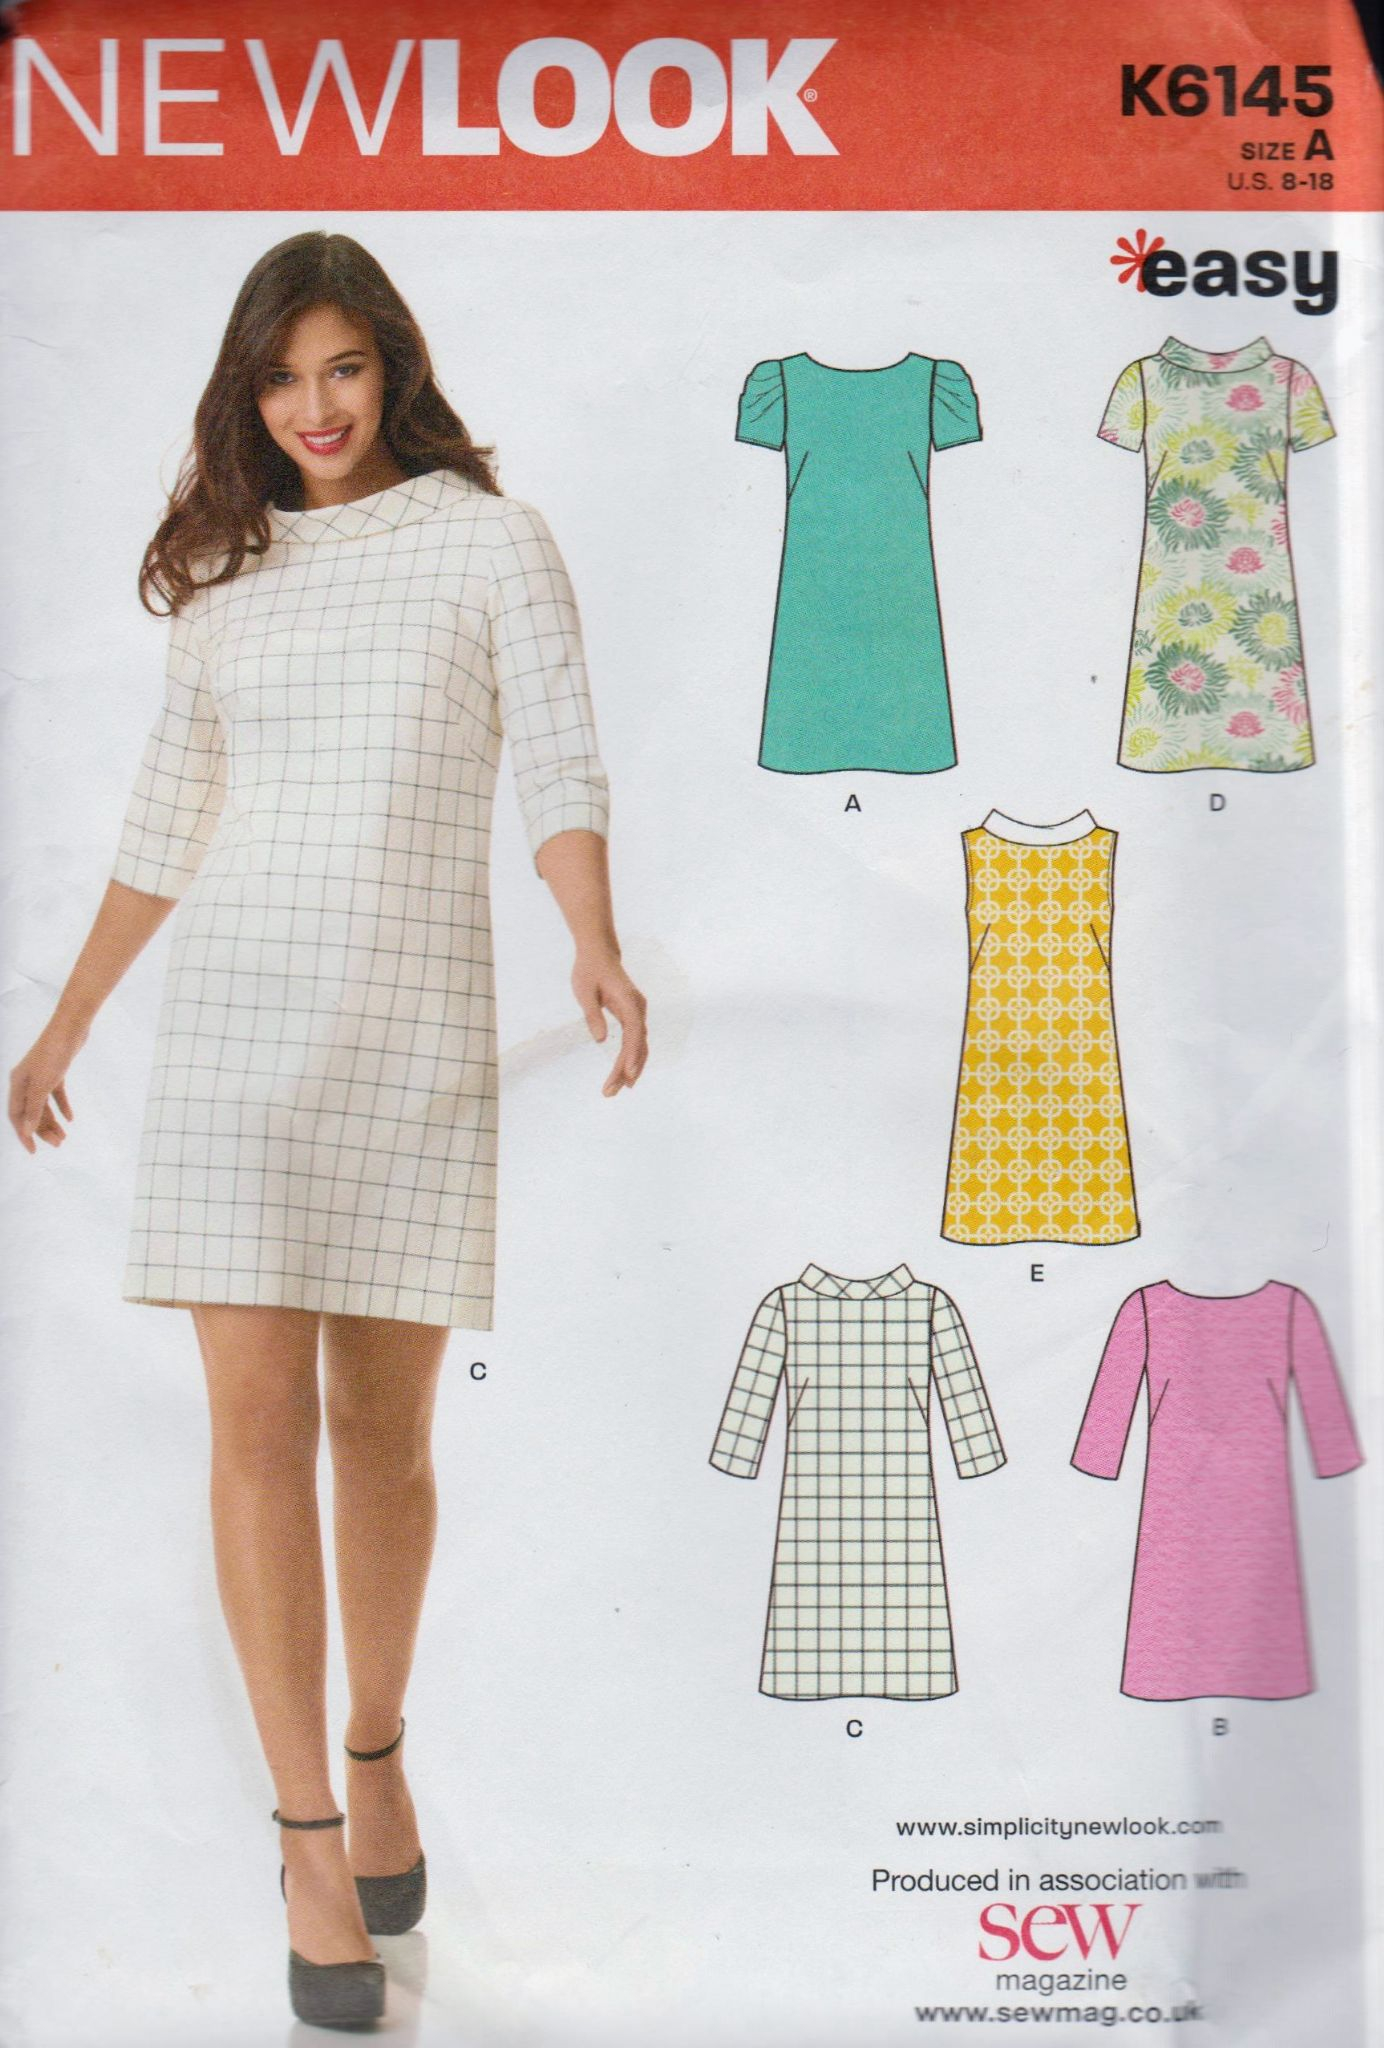 27+ Awesome Image of Vintage Sewing Patterns - figswoodfiredbistro.com